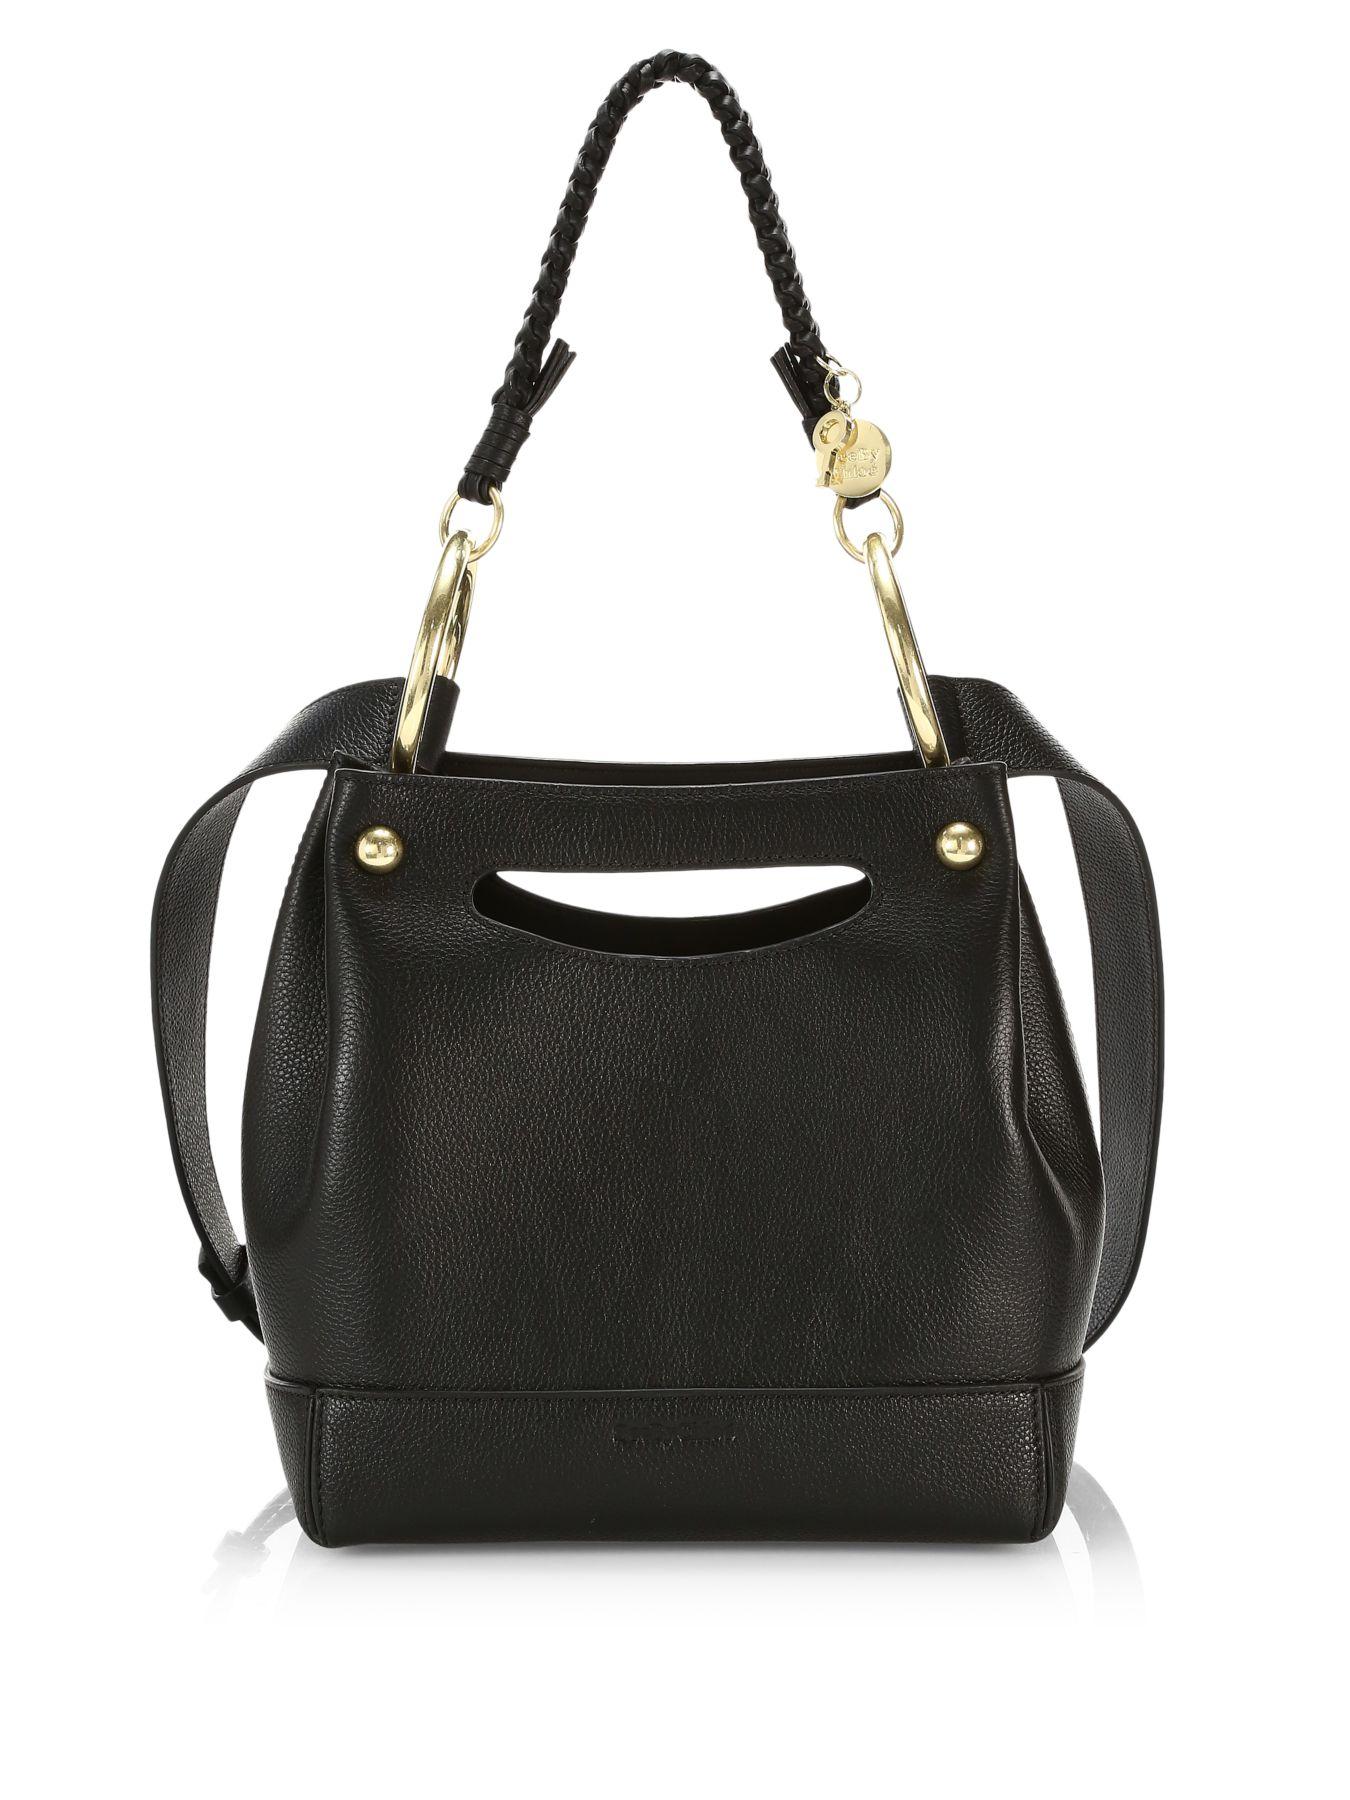 See By Chloé Maddy Shoulder Bag in Black | Lyst